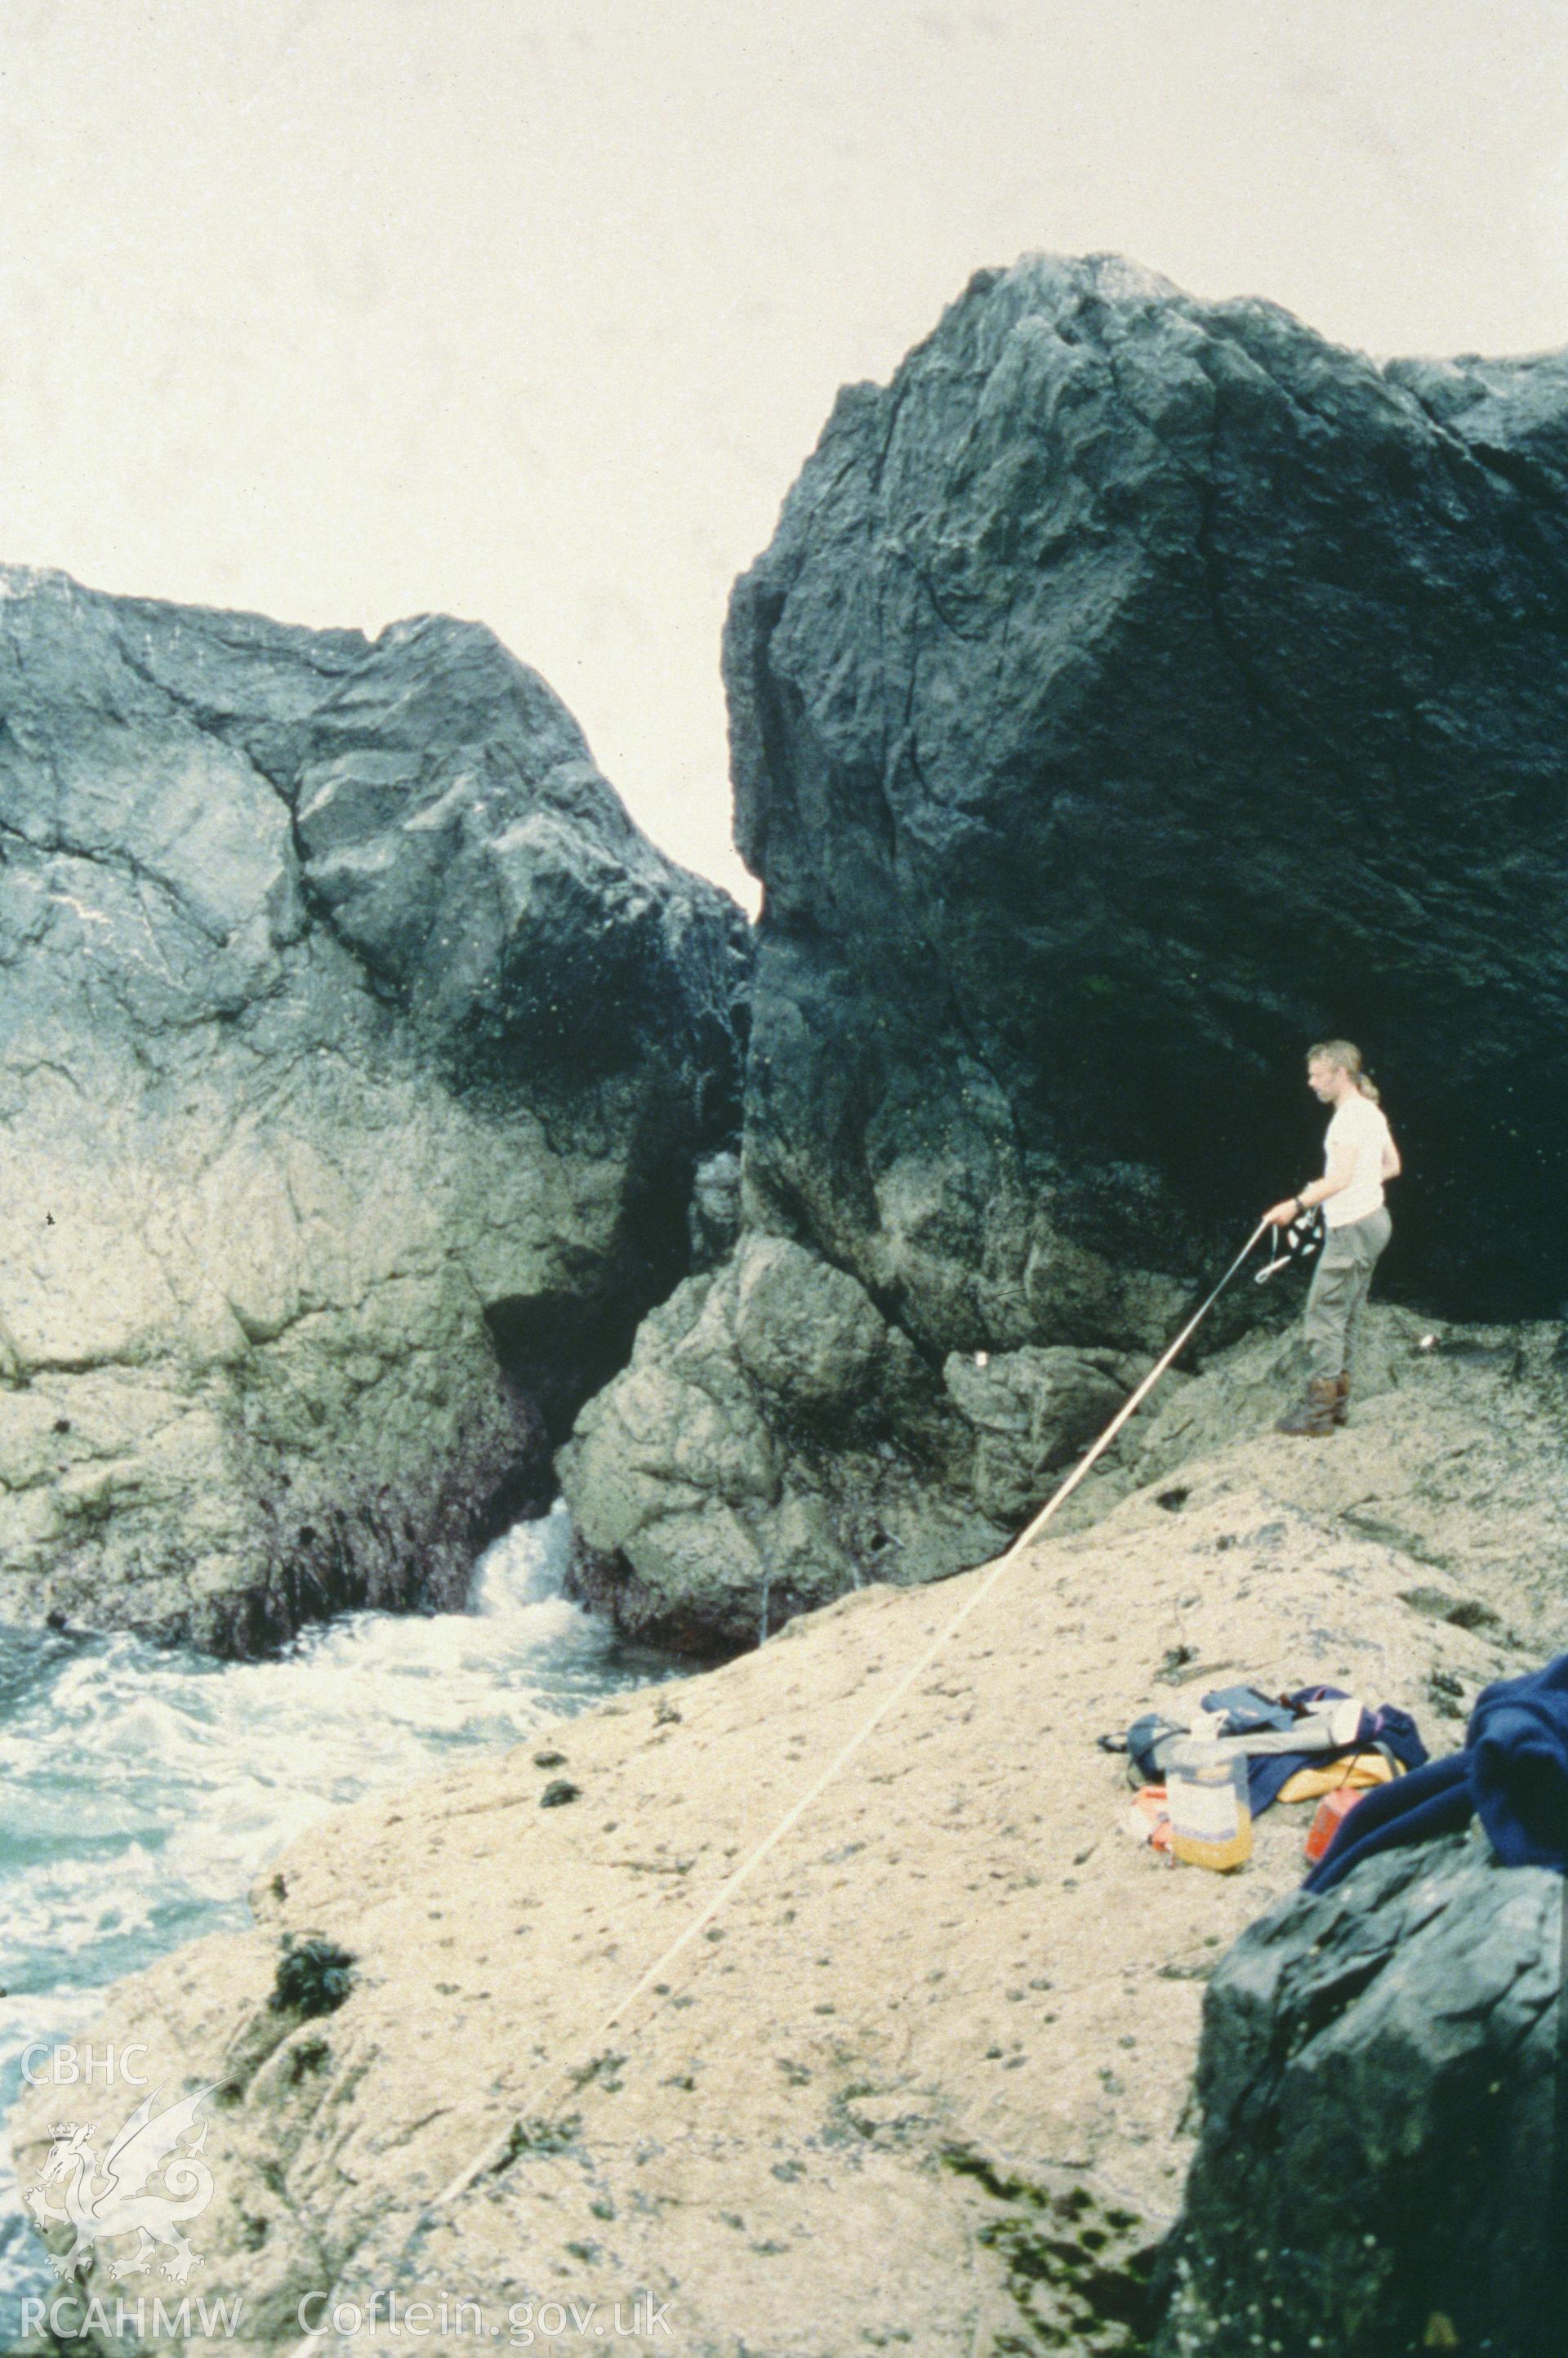 Colour slide of member of survey team at work on beach, from a survey of the Mary designated shipwreck, courtesy of National Museums, Liverpool (Merseyside Maritime Museum)